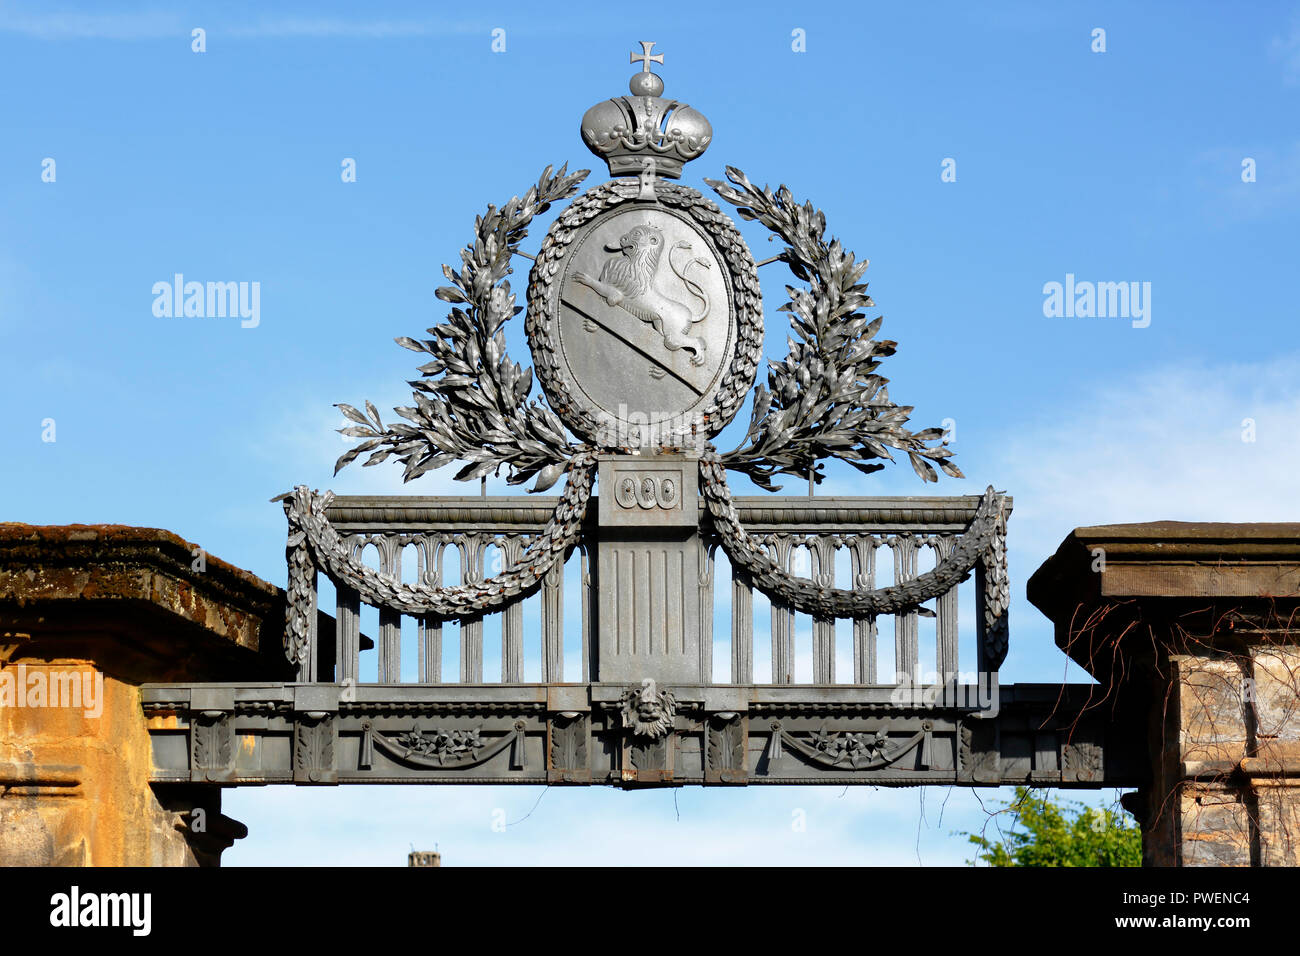 D-Bamberg, Regnitz, Main-Danube Canal, Upper Franconia, Franconia, Bavaria, Iron Gate, heraldic figure, driveway to the cathedral hill, UNESCO World Heritage Site Stock Photo